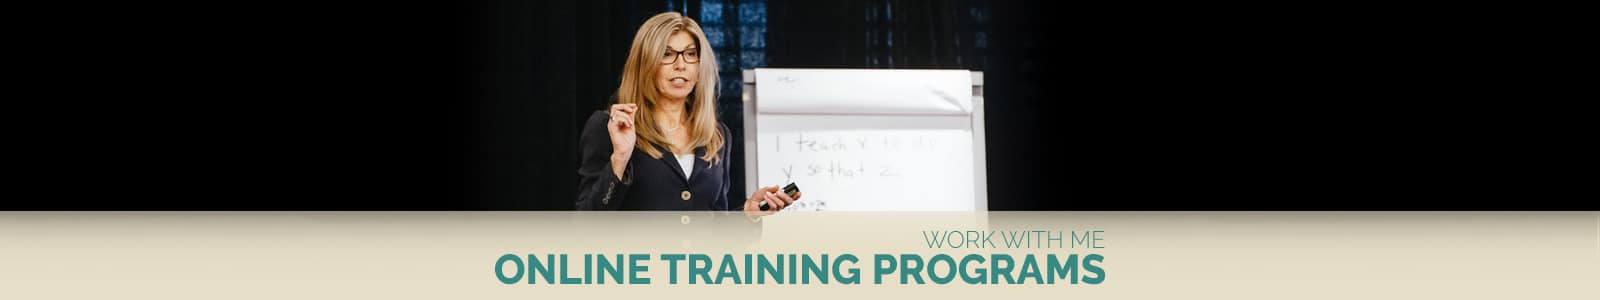 Online and Staff Training Programs For Medical Practices